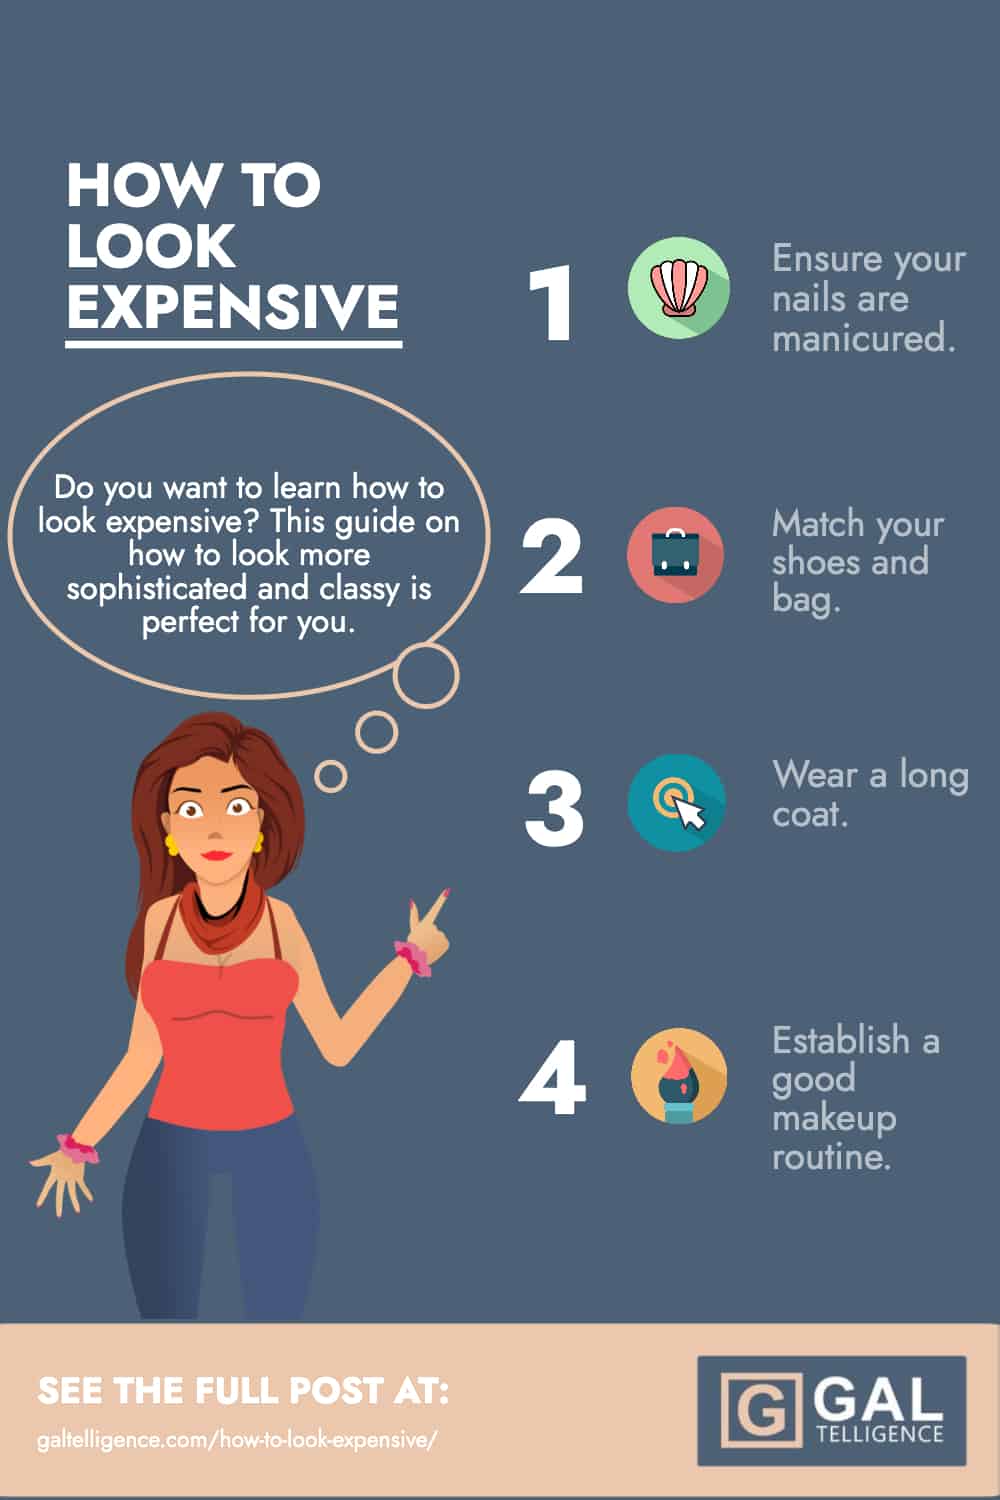 HOW TO LOOK EXPENSIVE - INFOGRAPHIC